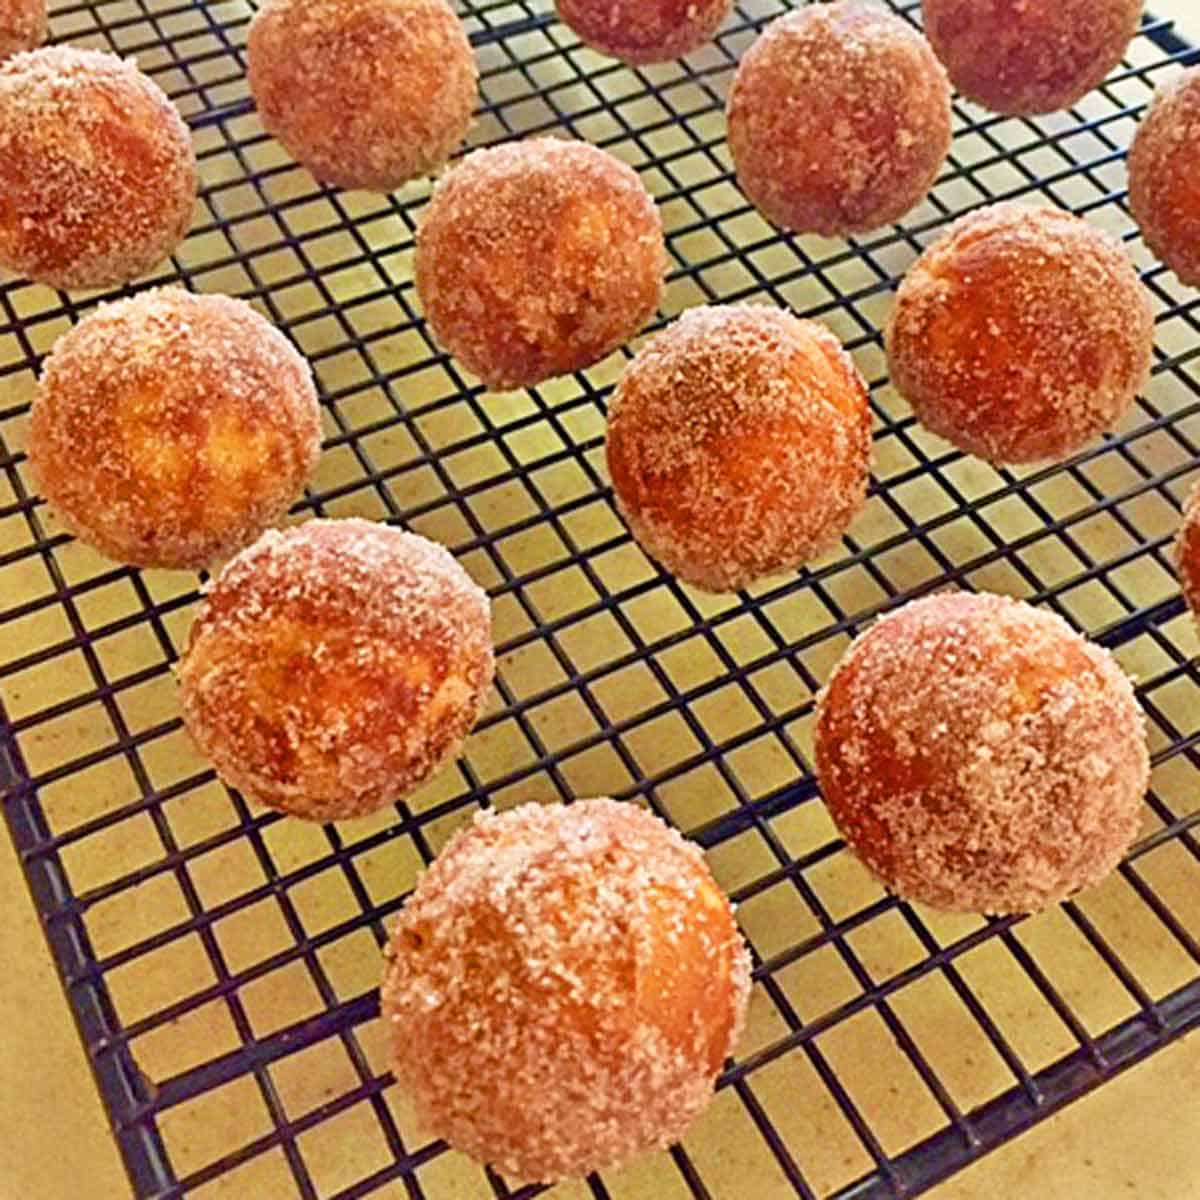 Just baked pumpkin donut holes cooling on a wire rack.